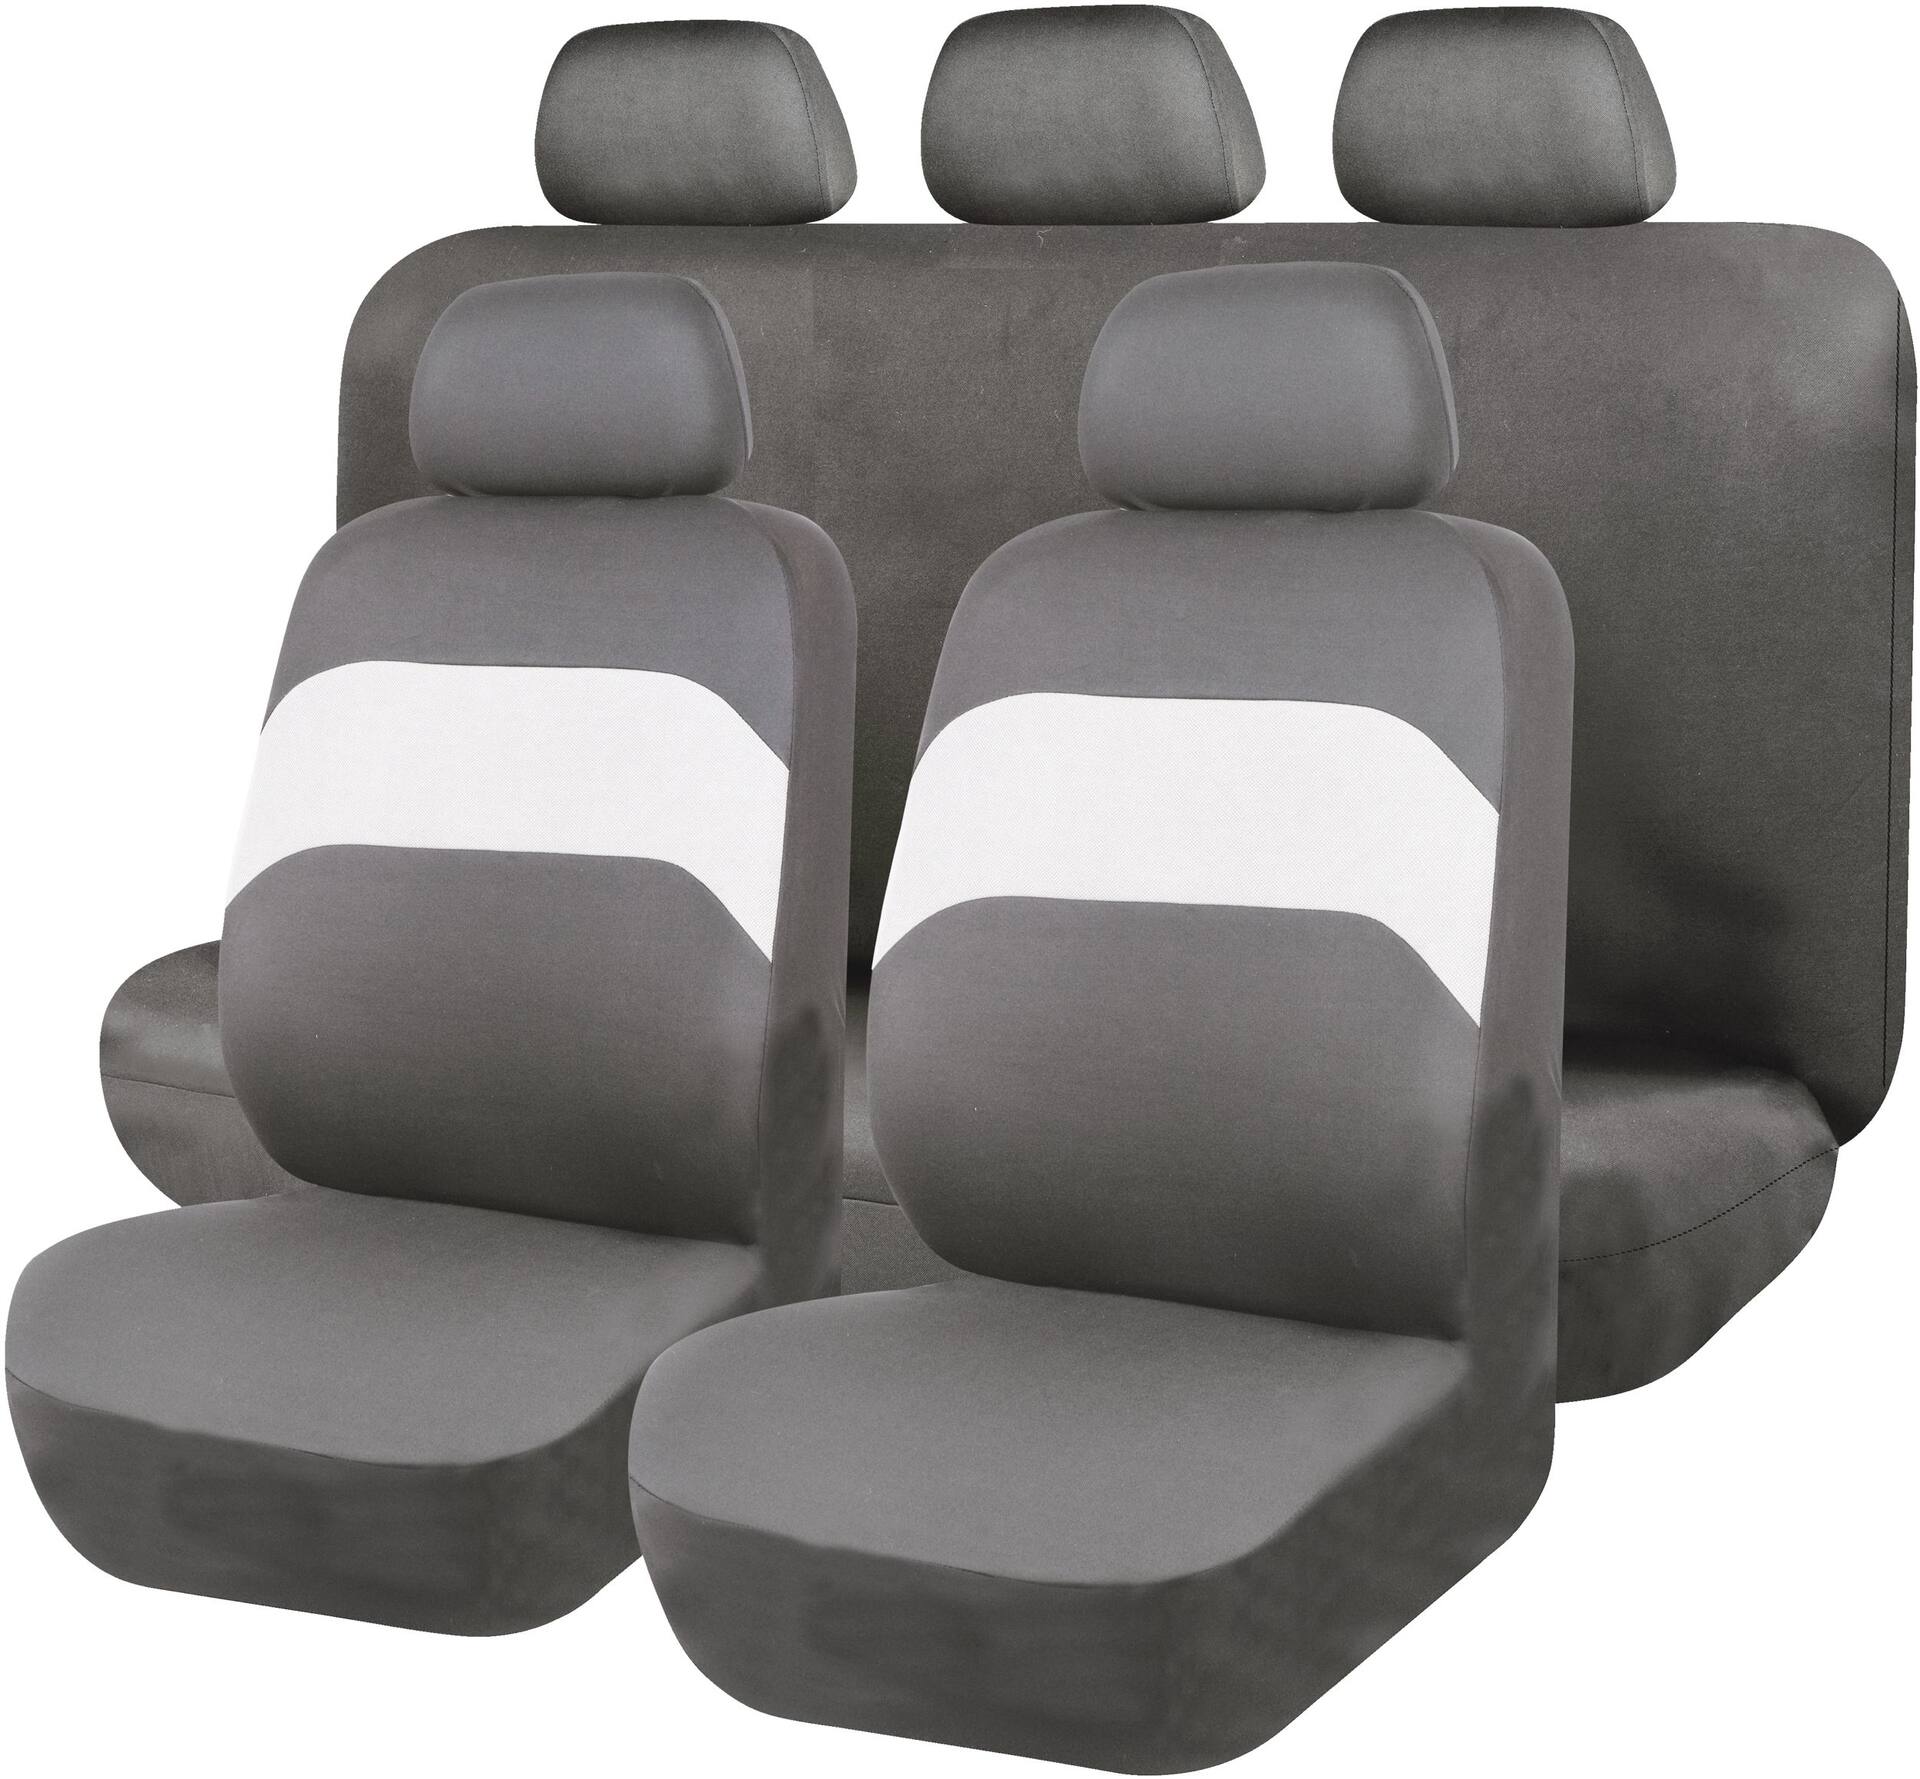 AutoTrends Seat Cover Set for Back Bench Seat, Black & Grey